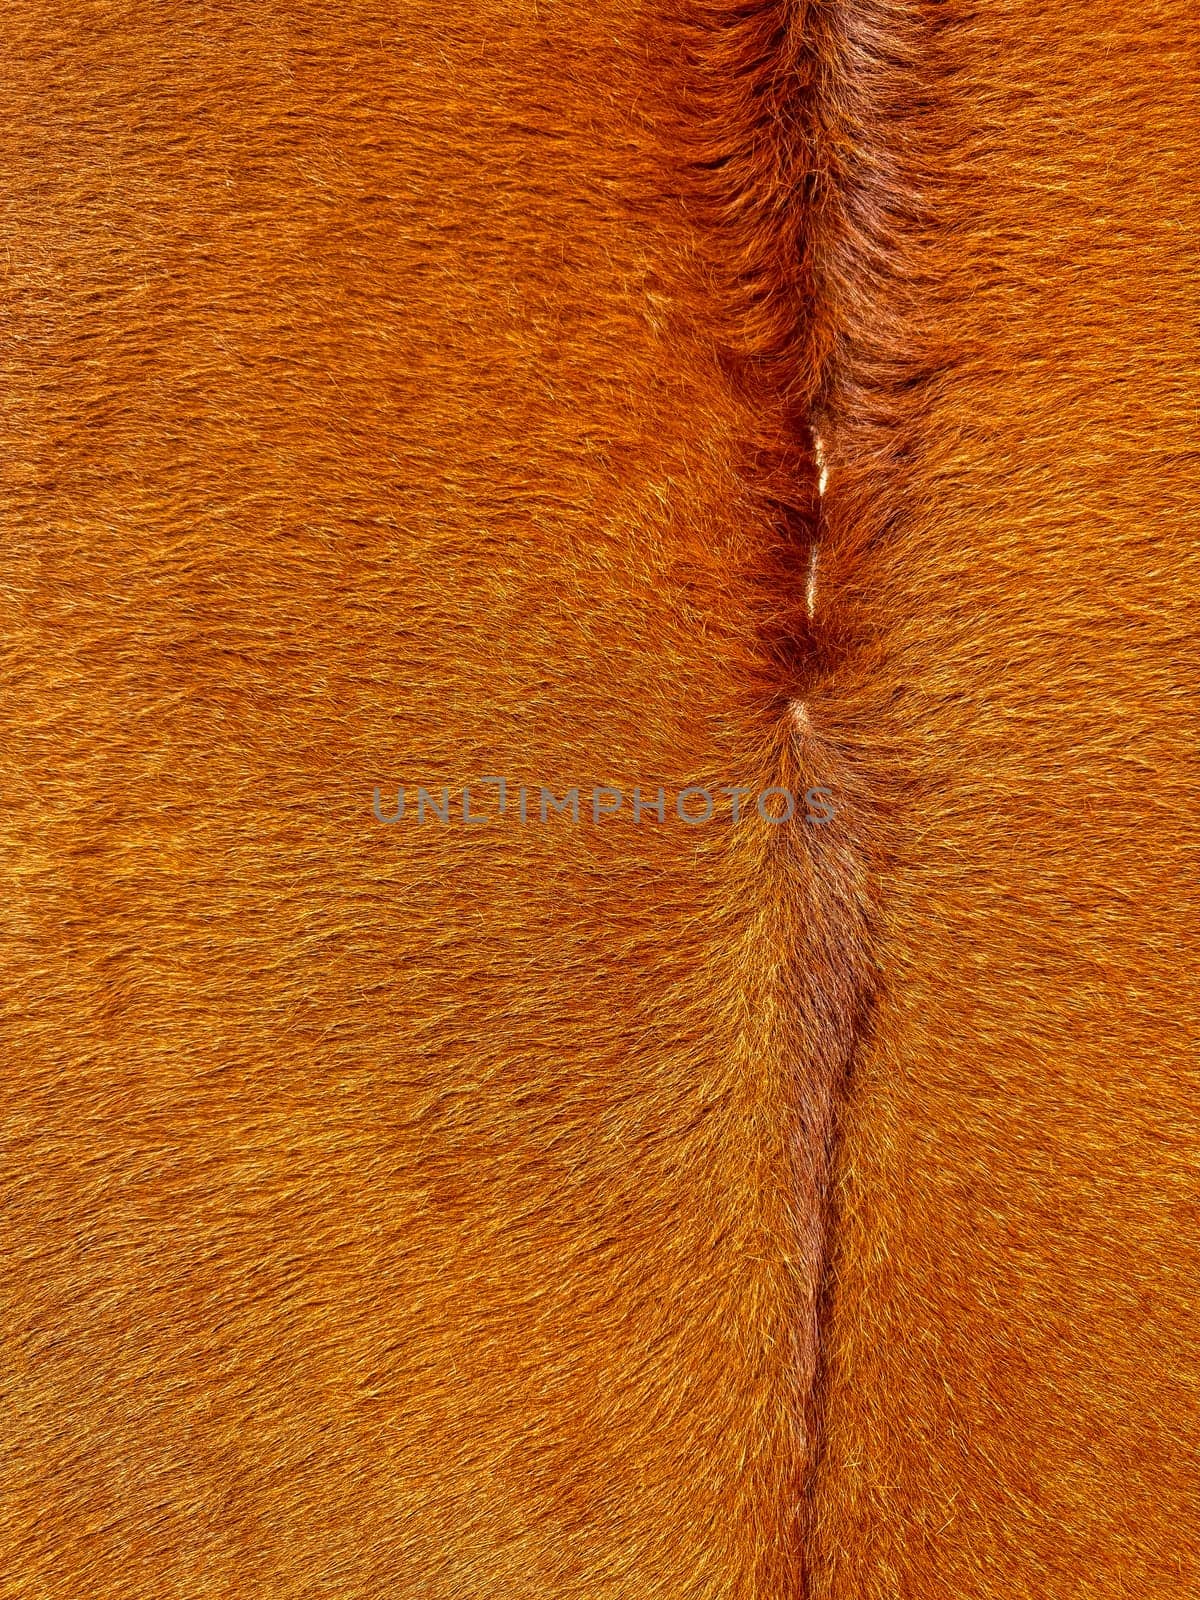 Close up macro texture of brown and white cowhide, detailed animal fur pattern for fashion and upholstery design. High quality photo